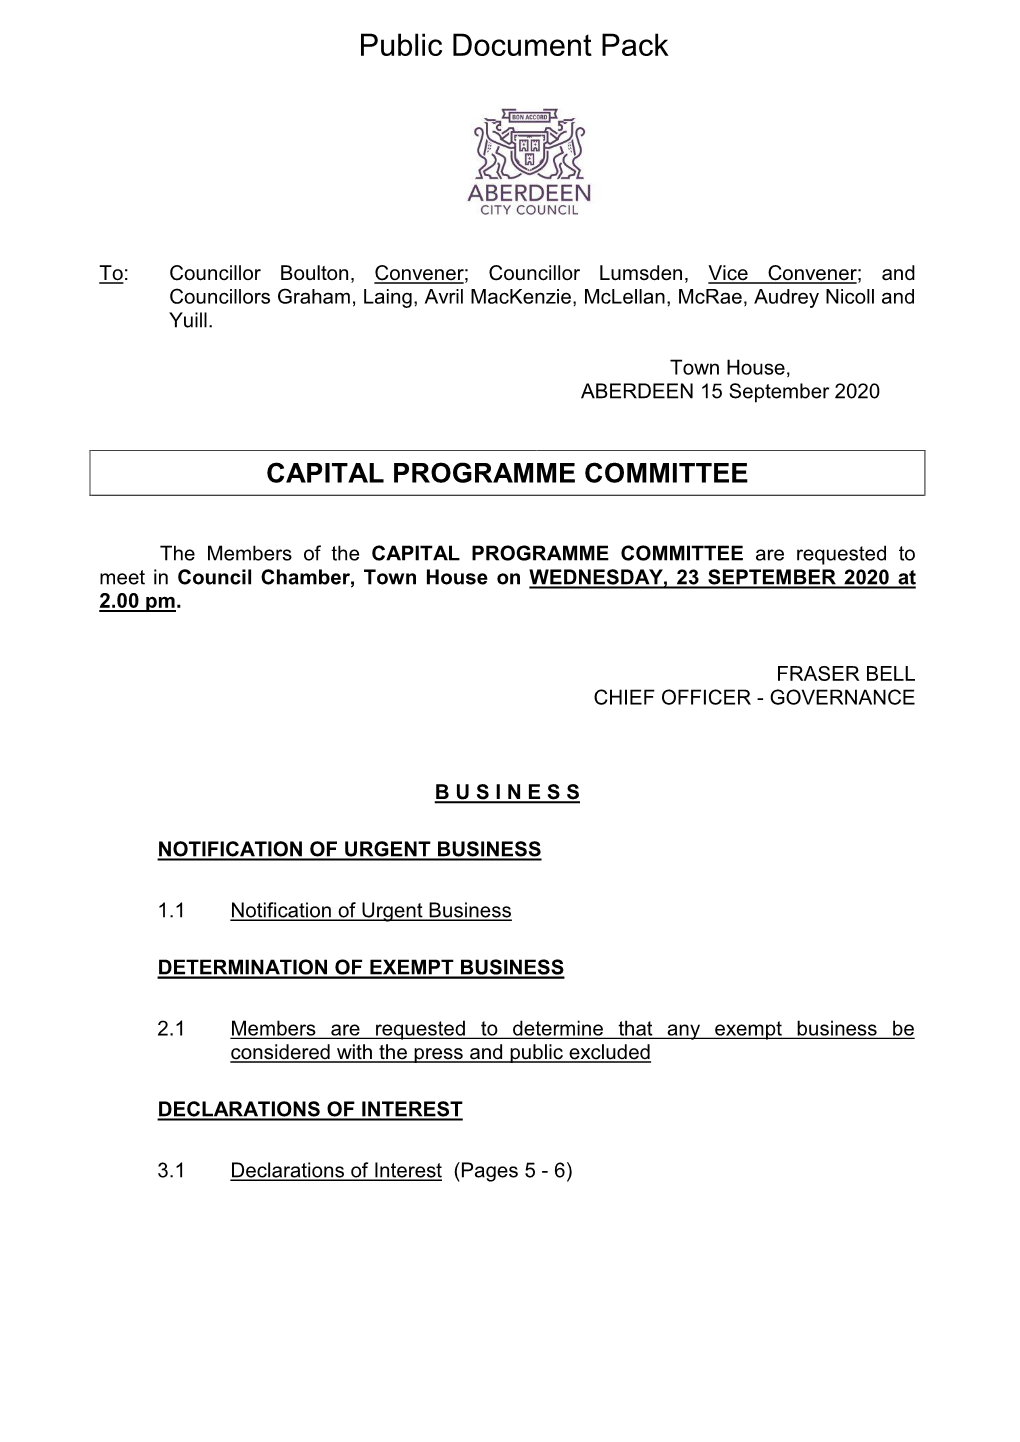 (Public Pack)Agenda Document for Capital Programme Committee, 23